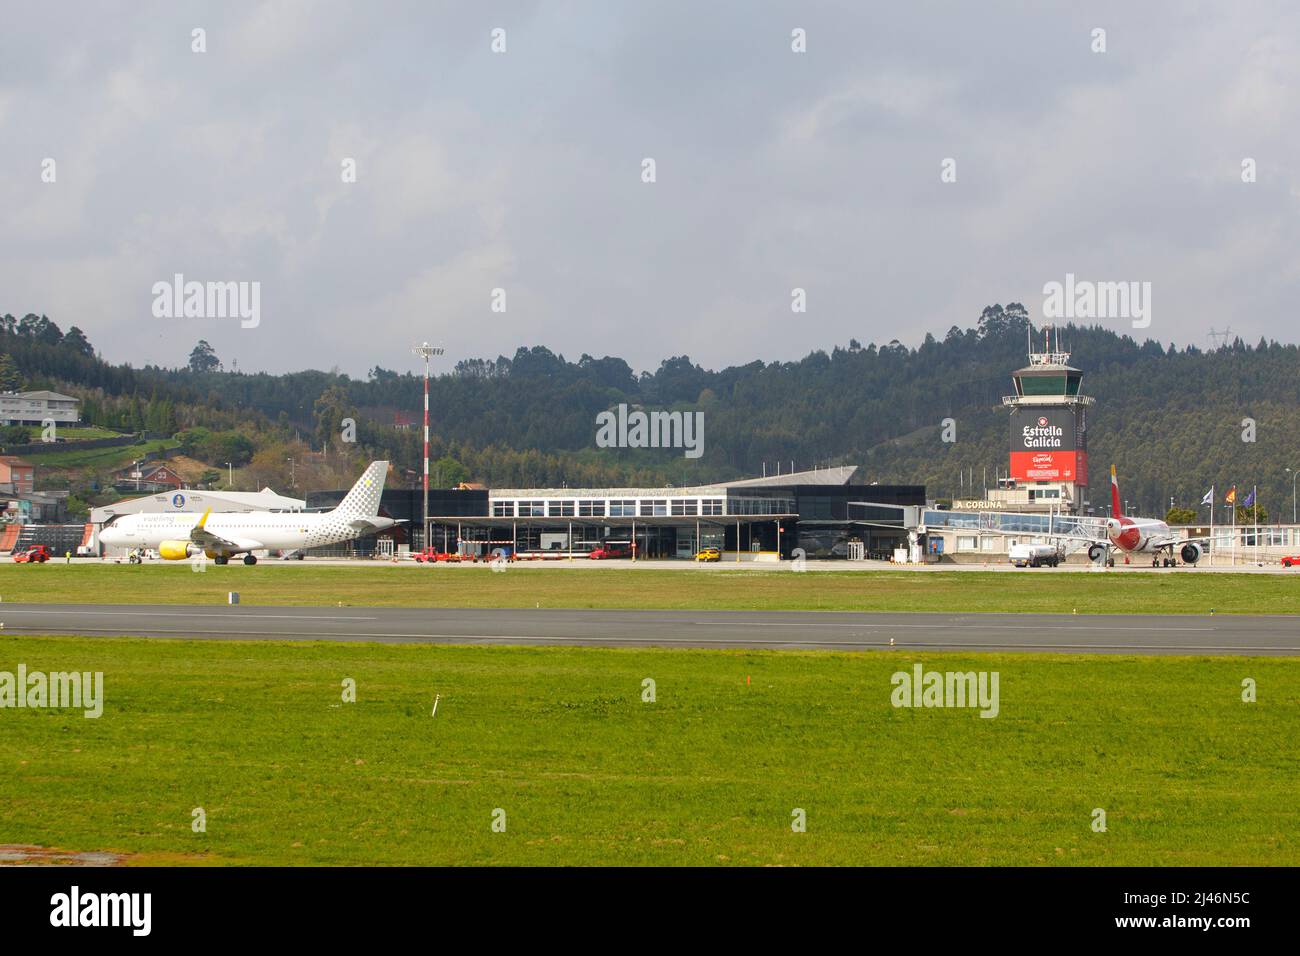 A Coruña-Spain. Alvedro Airport in A Coruña with several passenger planes parked on the runway as of March 30, 2022 Stock Photo